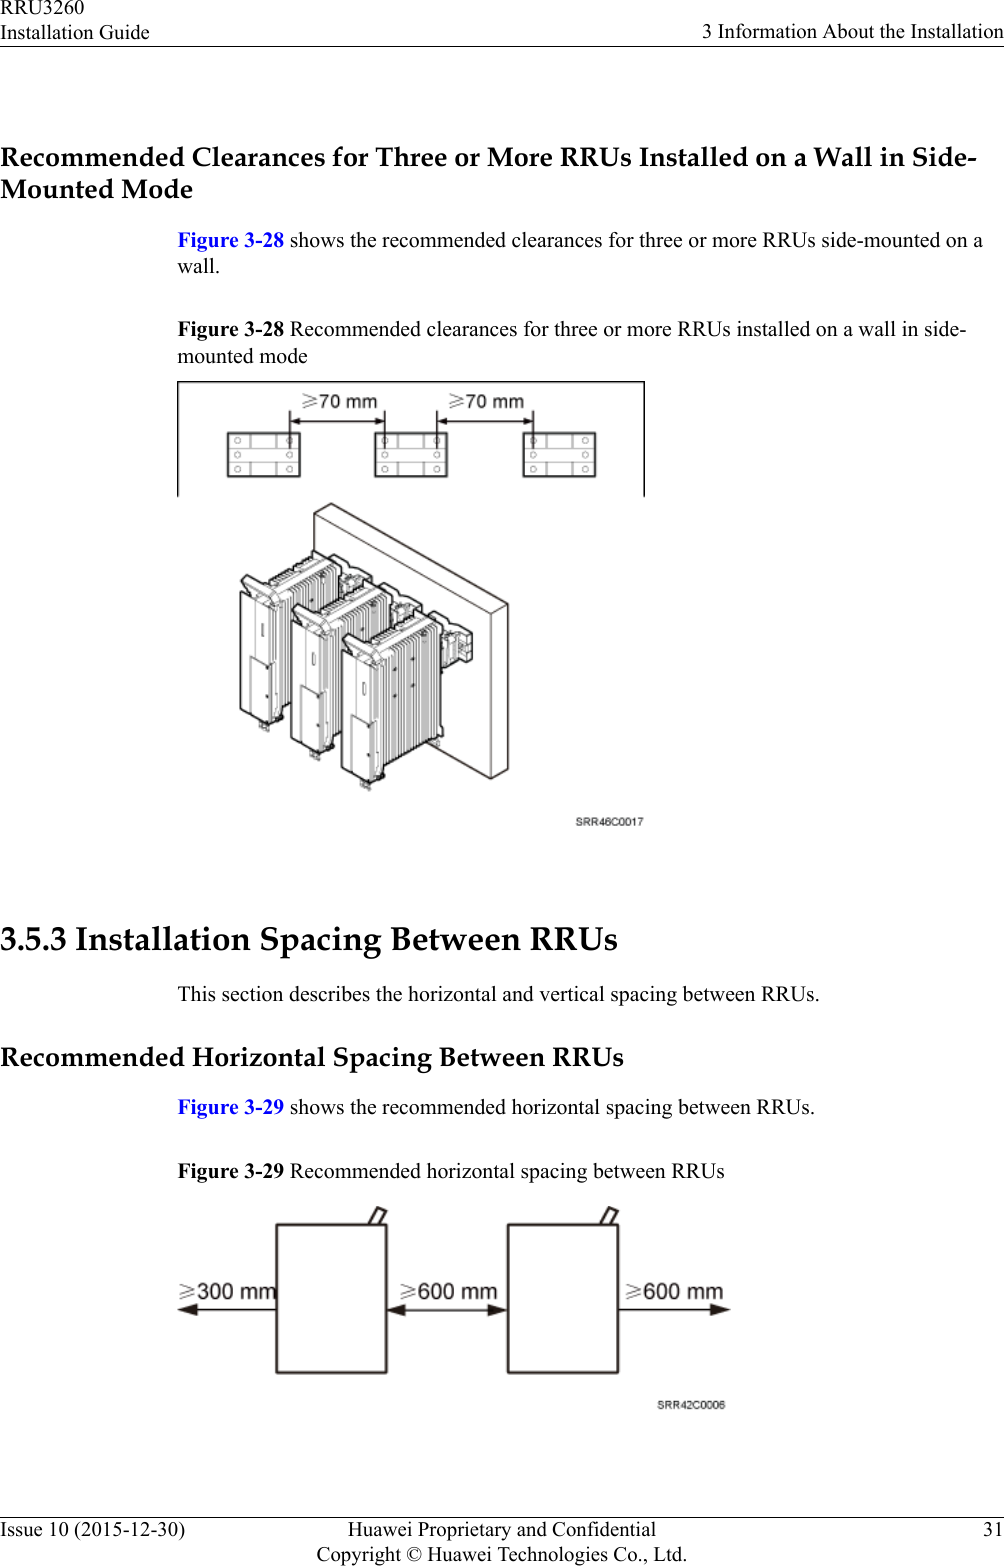  Recommended Clearances for Three or More RRUs Installed on a Wall in Side-Mounted ModeFigure 3-28 shows the recommended clearances for three or more RRUs side-mounted on awall.Figure 3-28 Recommended clearances for three or more RRUs installed on a wall in side-mounted mode 3.5.3 Installation Spacing Between RRUsThis section describes the horizontal and vertical spacing between RRUs.Recommended Horizontal Spacing Between RRUsFigure 3-29 shows the recommended horizontal spacing between RRUs.Figure 3-29 Recommended horizontal spacing between RRUs RRU3260Installation Guide 3 Information About the InstallationIssue 10 (2015-12-30) Huawei Proprietary and ConfidentialCopyright © Huawei Technologies Co., Ltd.31